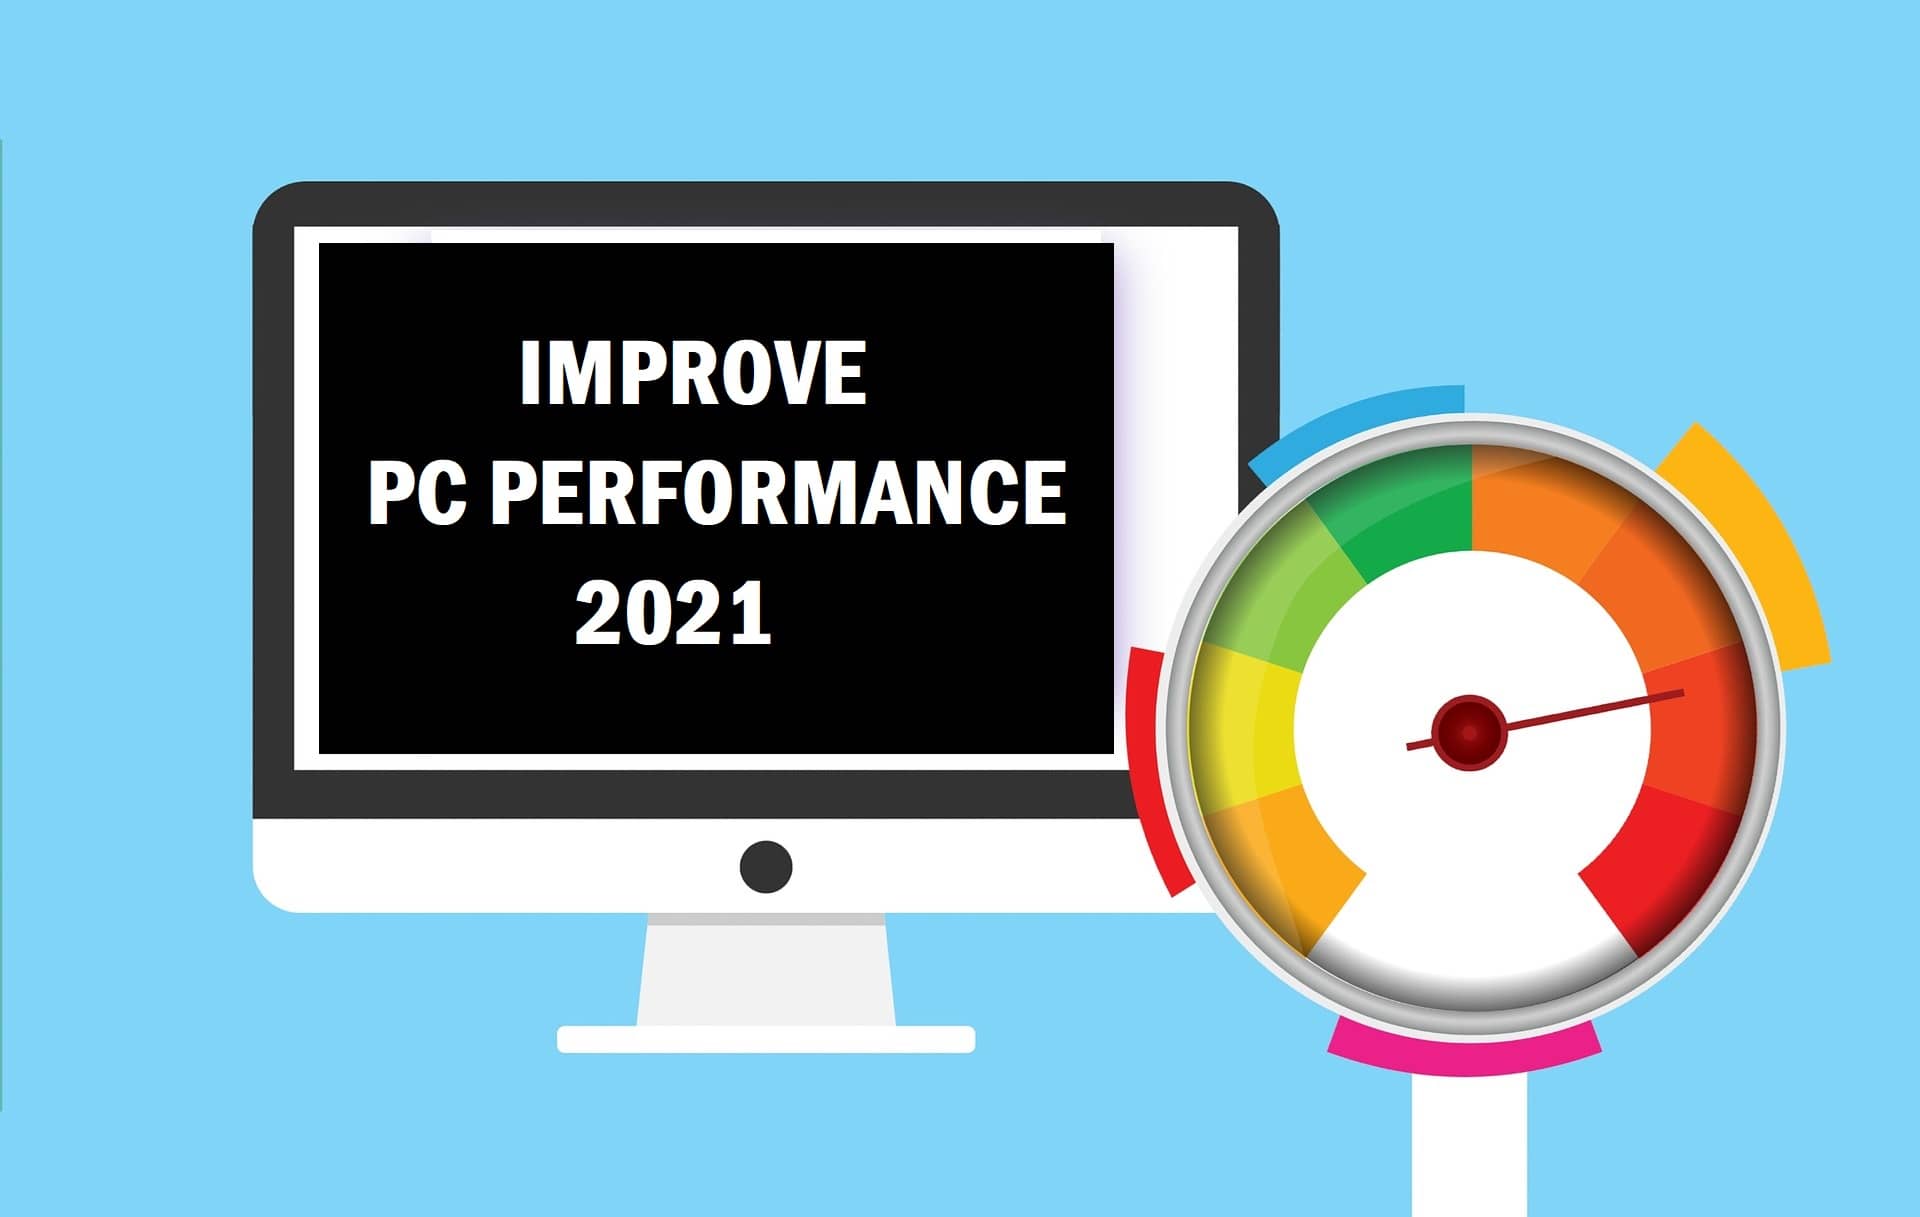 Tips to improve PC performance in Windows 10 – 2021